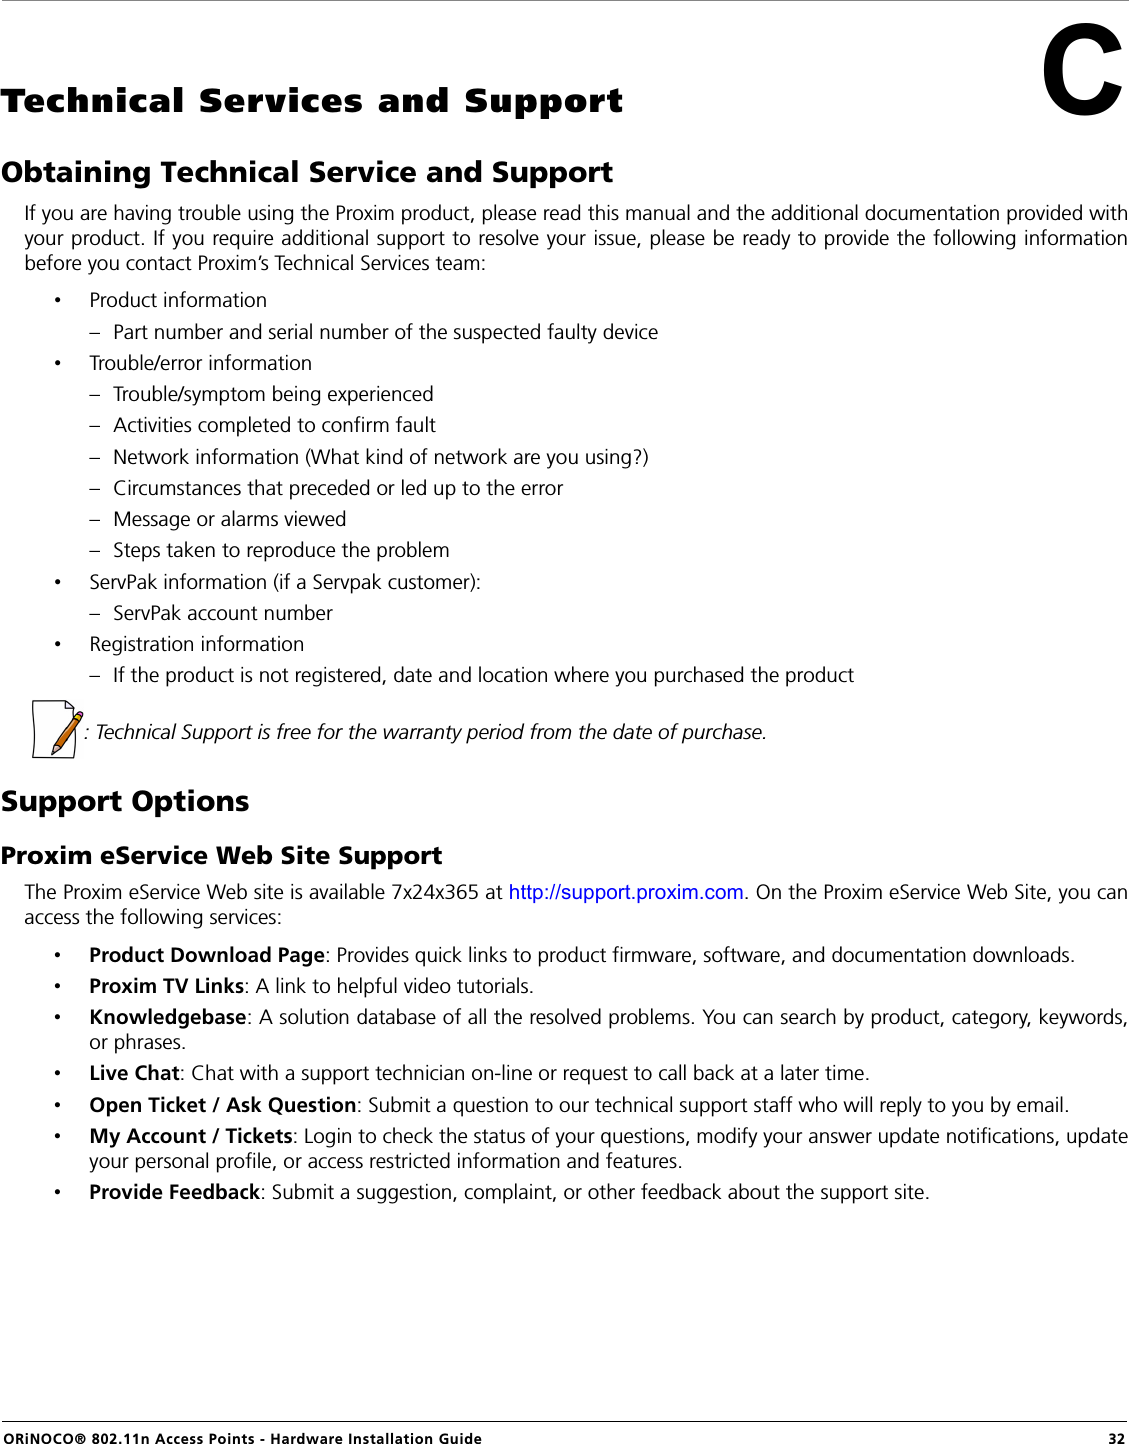 ORiNOCO® 802.11n Access Points - Hardware Installation Guide  32CTechnical Services and SupportObtaining Technical Service and SupportIf you are having trouble using the Proxim product, please read this manual and the additional documentation provided withyour product. If you require additional support to resolve your issue, please be ready to provide the following informationbefore you contact Proxim’s Technical Services team:•Product information– Part number and serial number of the suspected faulty device•Trouble/error information– Trouble/symptom being experienced– Activities completed to confirm fault– Network information (What kind of network are you using?)– Circumstances that preceded or led up to the error– Message or alarms viewed– Steps taken to reproduce the problem•ServPak information (if a Servpak customer):– ServPak account number•Registration information– If the product is not registered, date and location where you purchased the product  : Technical Support is free for the warranty period from the date of purchase.Support OptionsProxim eService Web Site SupportThe Proxim eService Web site is available 7x24x365 at http://support.proxim.com. On the Proxim eService Web Site, you canaccess the following services:•Product Download Page: Provides quick links to product firmware, software, and documentation downloads.•Proxim TV Links: A link to helpful video tutorials.•Knowledgebase: A solution database of all the resolved problems. You can search by product, category, keywords,or phrases.•Live Chat: Chat with a support technician on-line or request to call back at a later time.•Open Ticket / Ask Question: Submit a question to our technical support staff who will reply to you by email.•My Account / Tickets: Login to check the status of your questions, modify your answer update notifications, updateyour personal profile, or access restricted information and features.•Provide Feedback: Submit a suggestion, complaint, or other feedback about the support site.